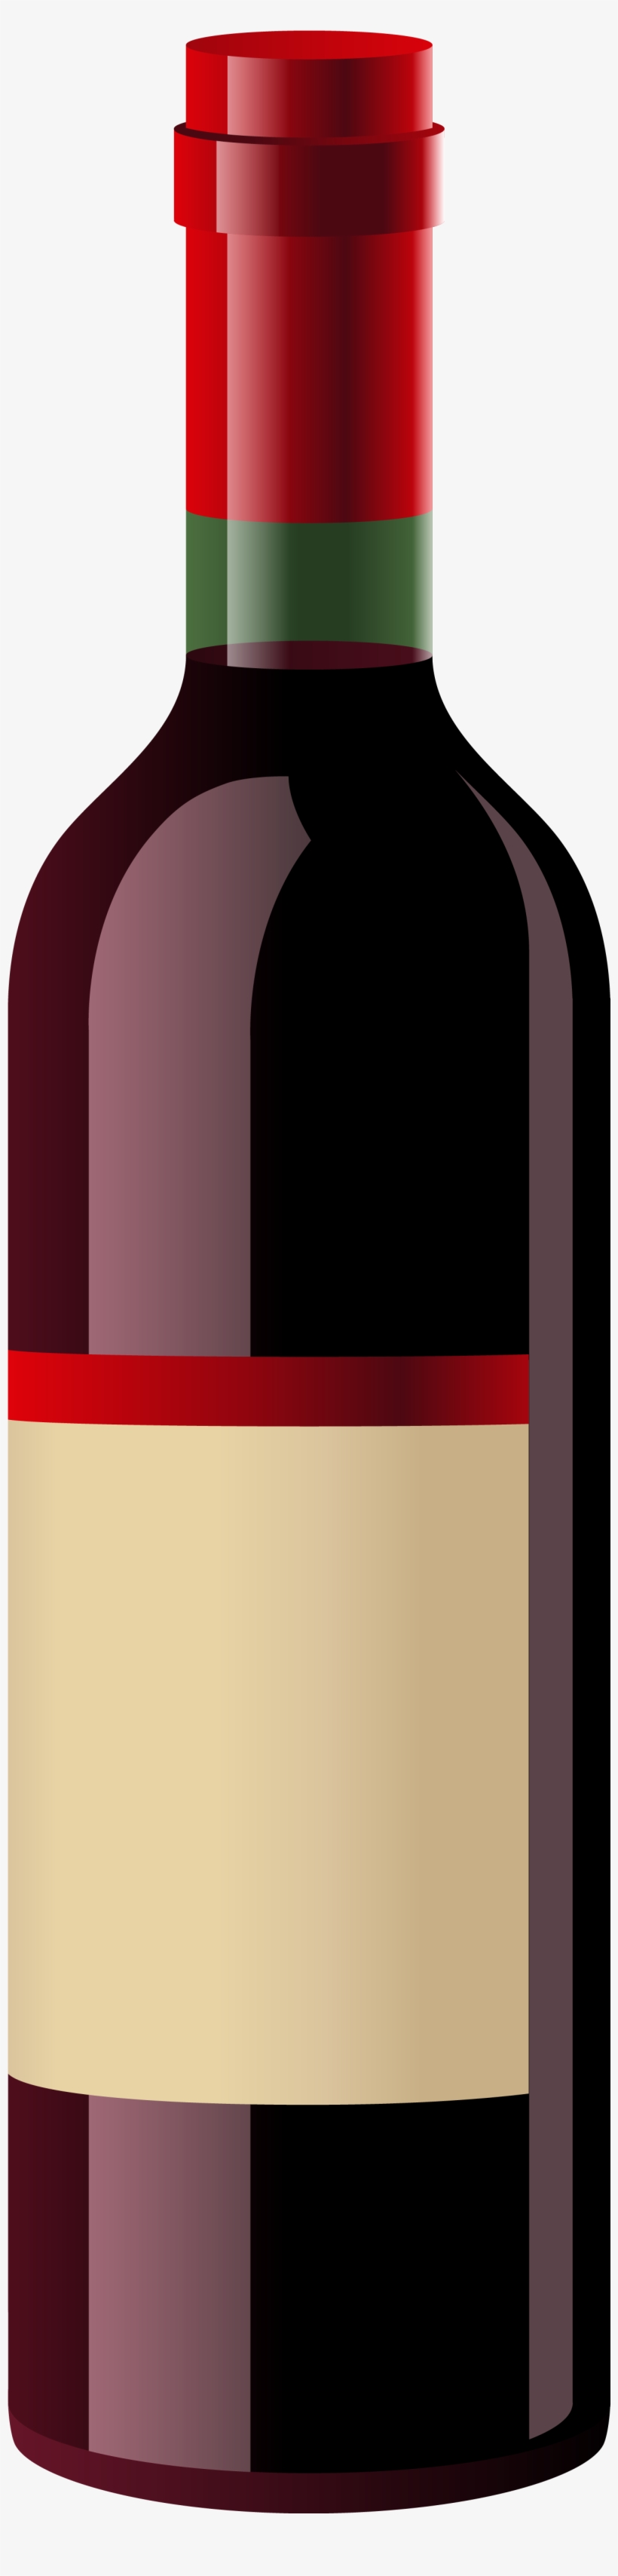 Red Wine Bottle Png